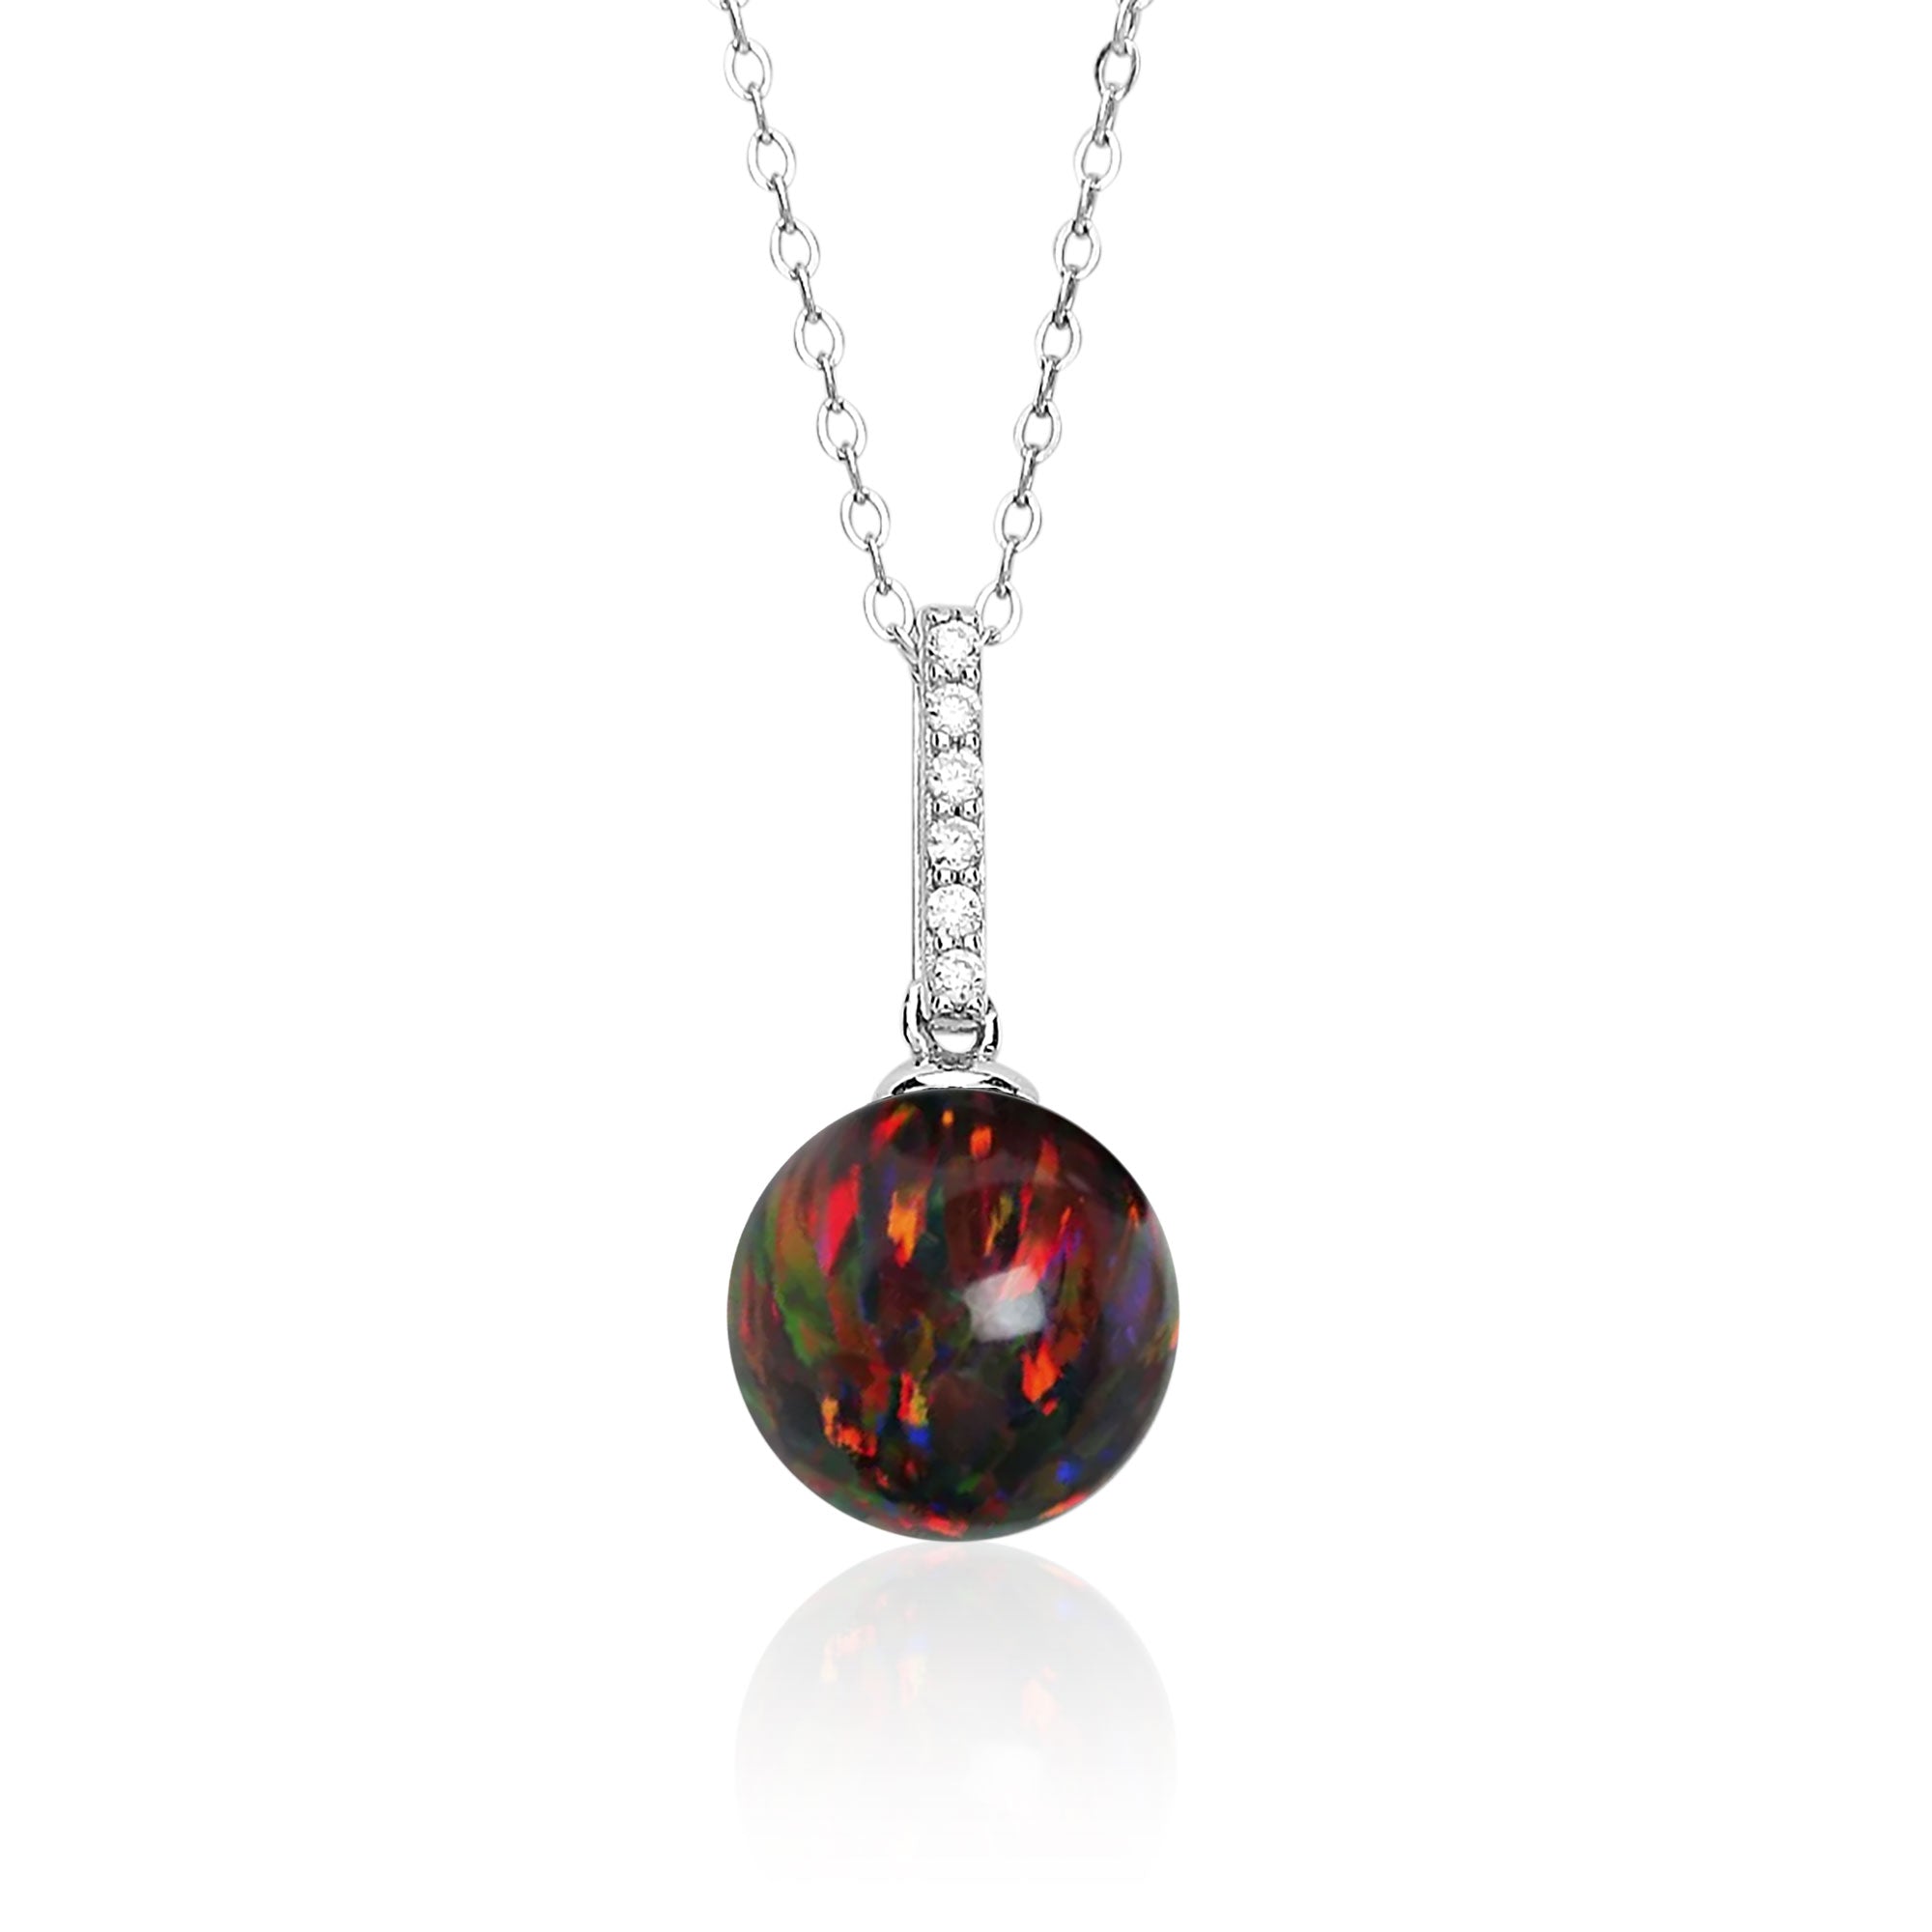 Black Fire Opal Pendant Necklace in Sterling Silver, 10 MM Round